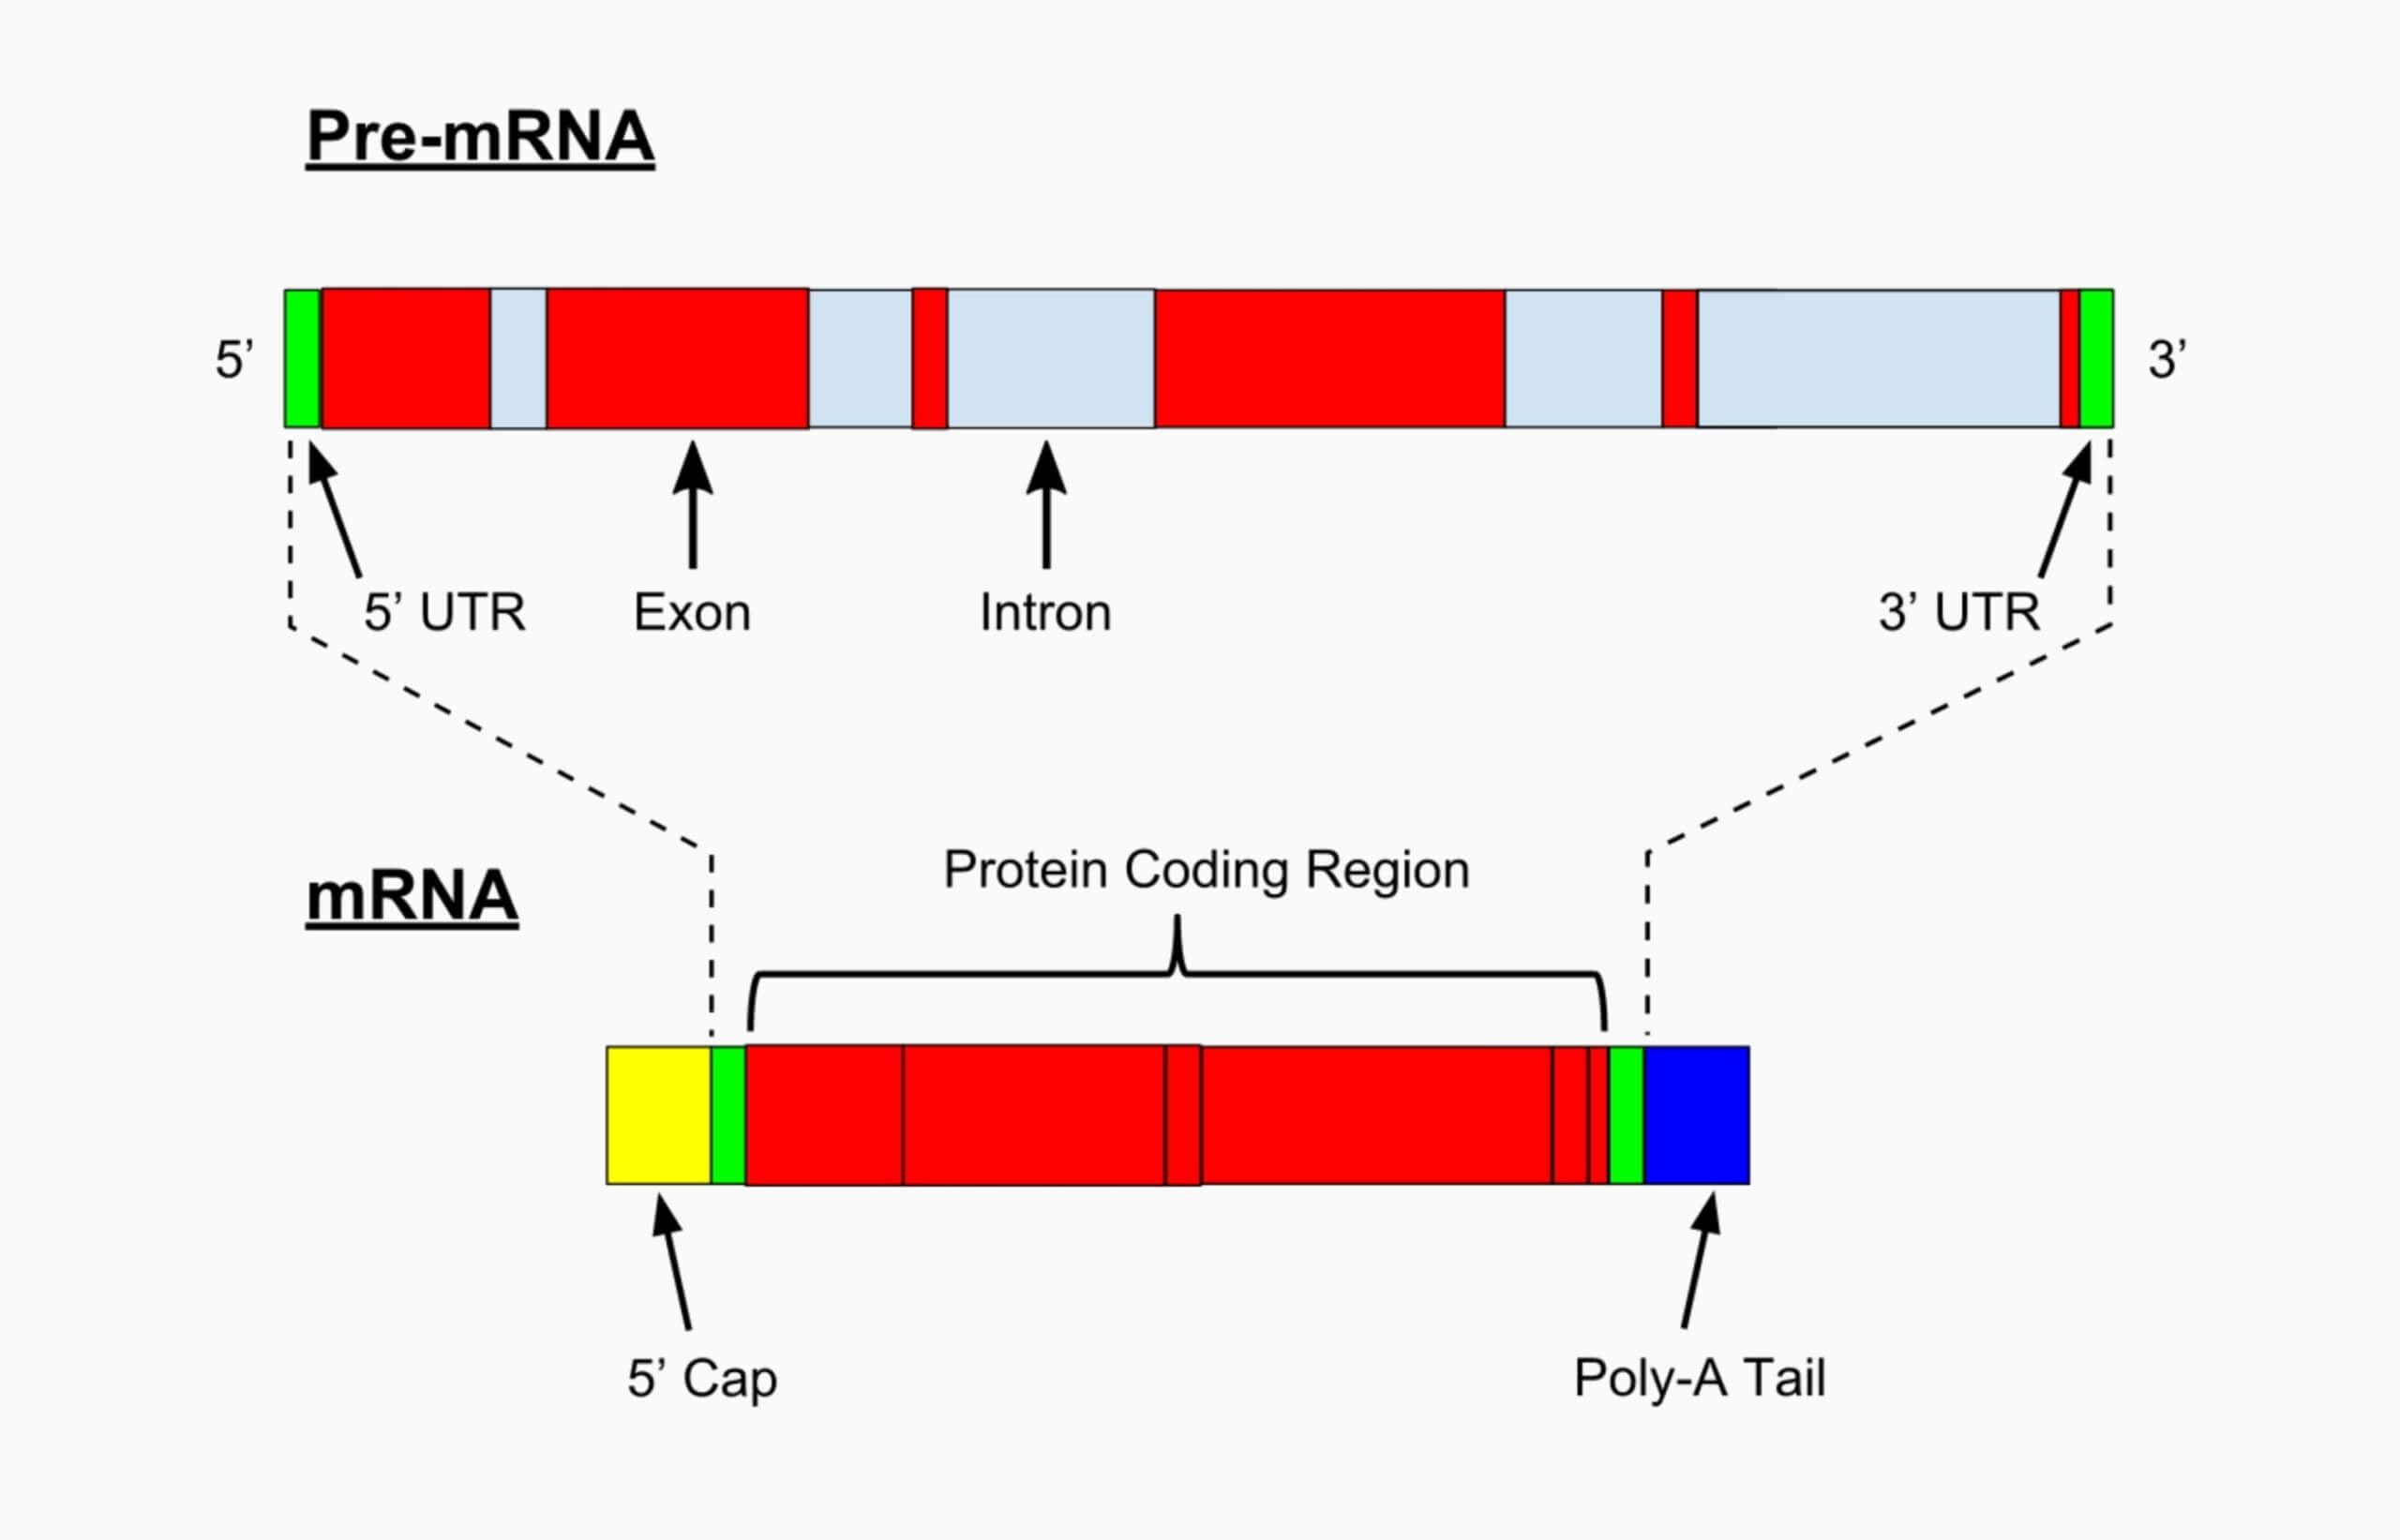 Introns are non-coding sections of a gene that are called “Junk DNA” ©Wikimedia Commons